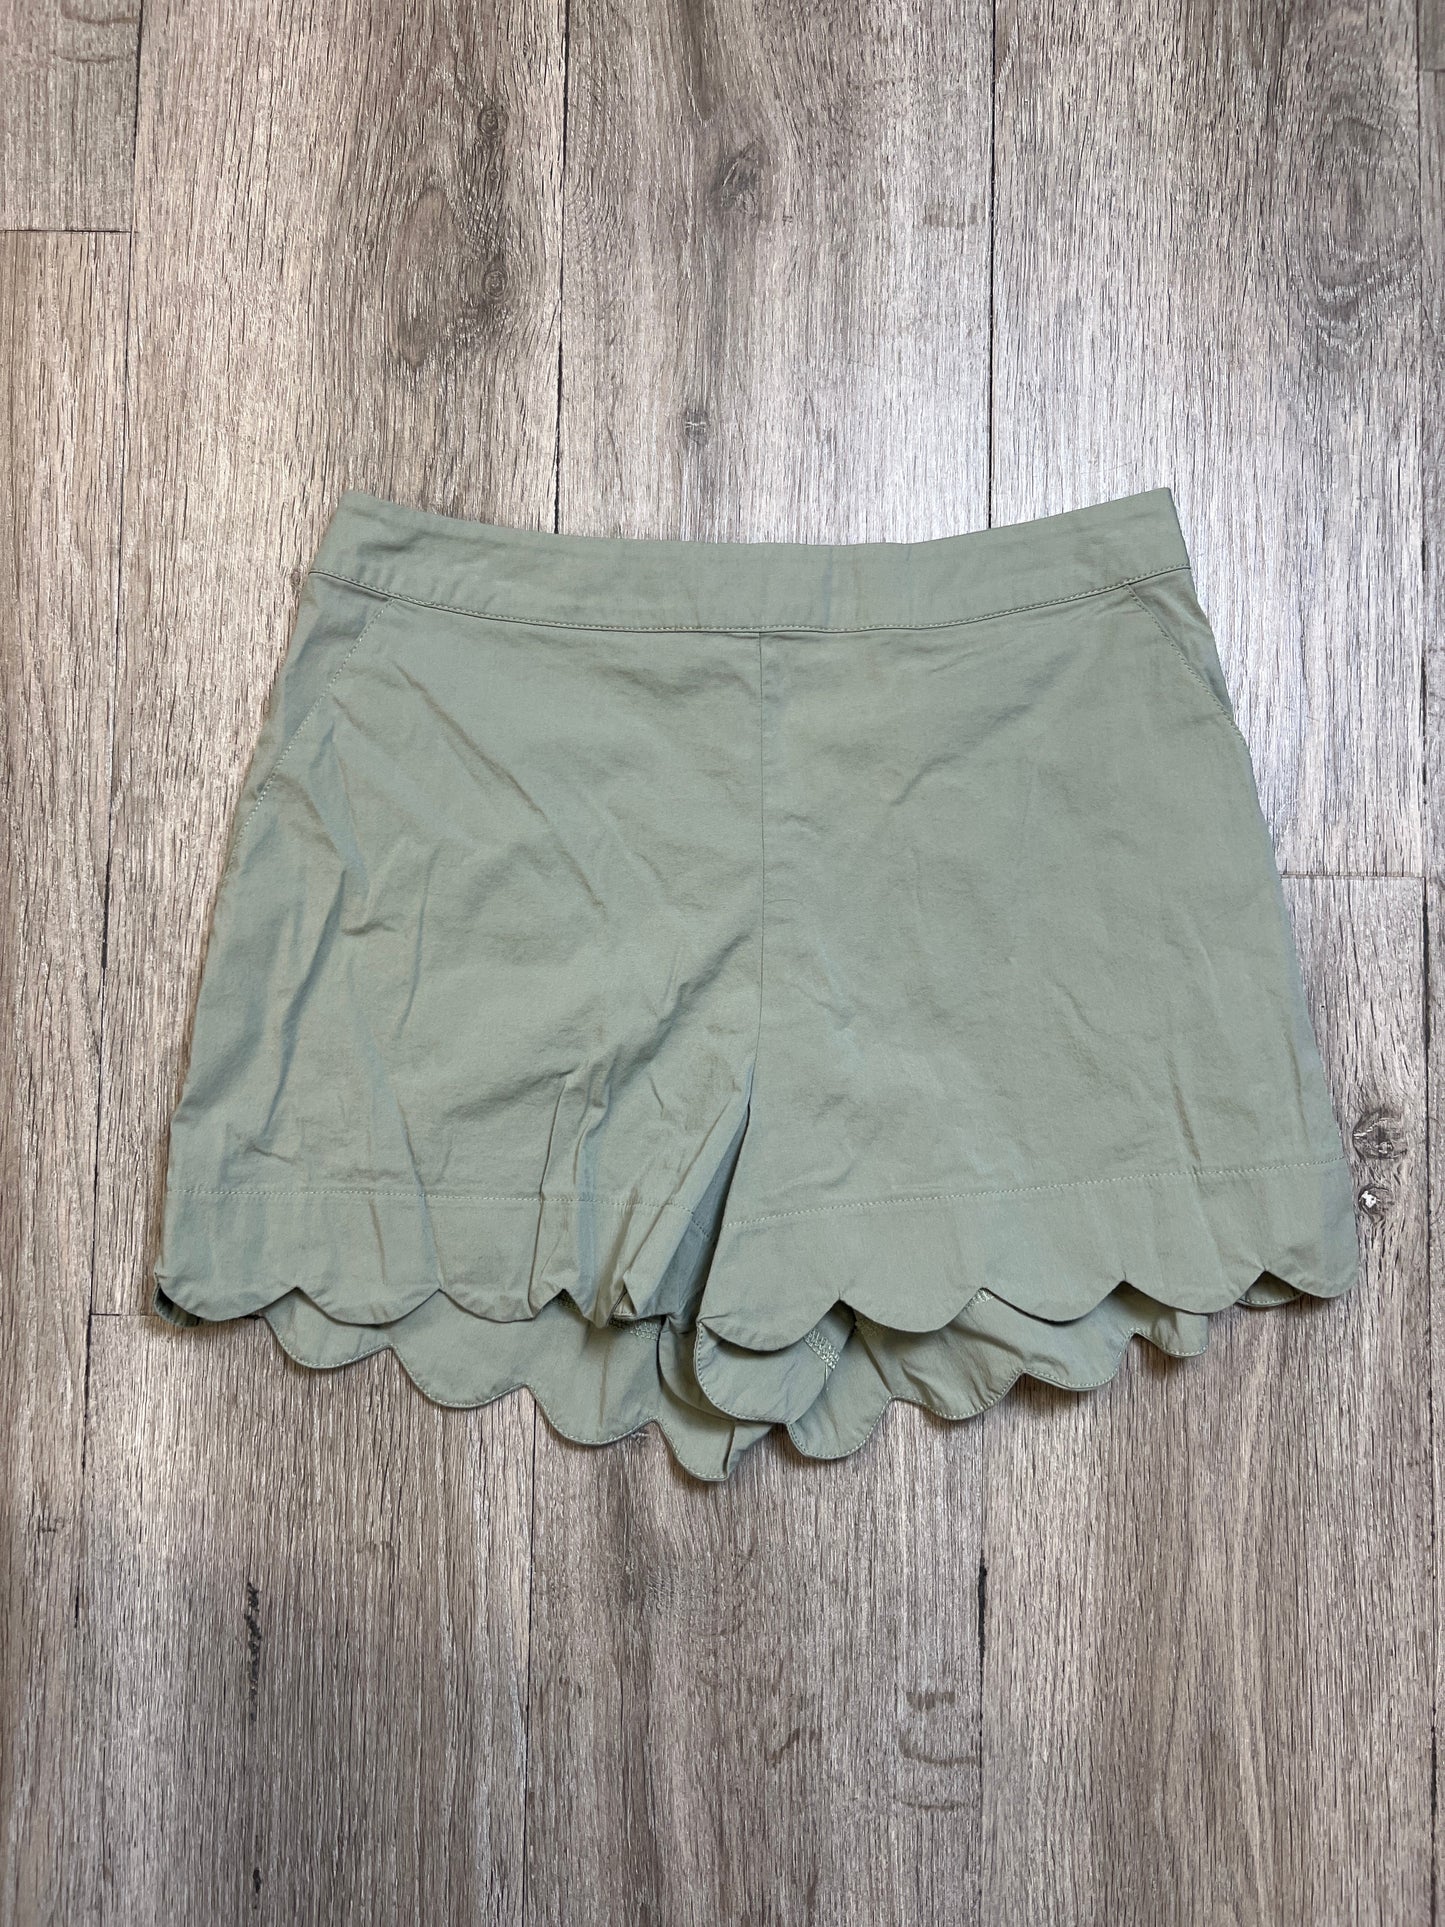 Shorts By June & Hudson  Size: M